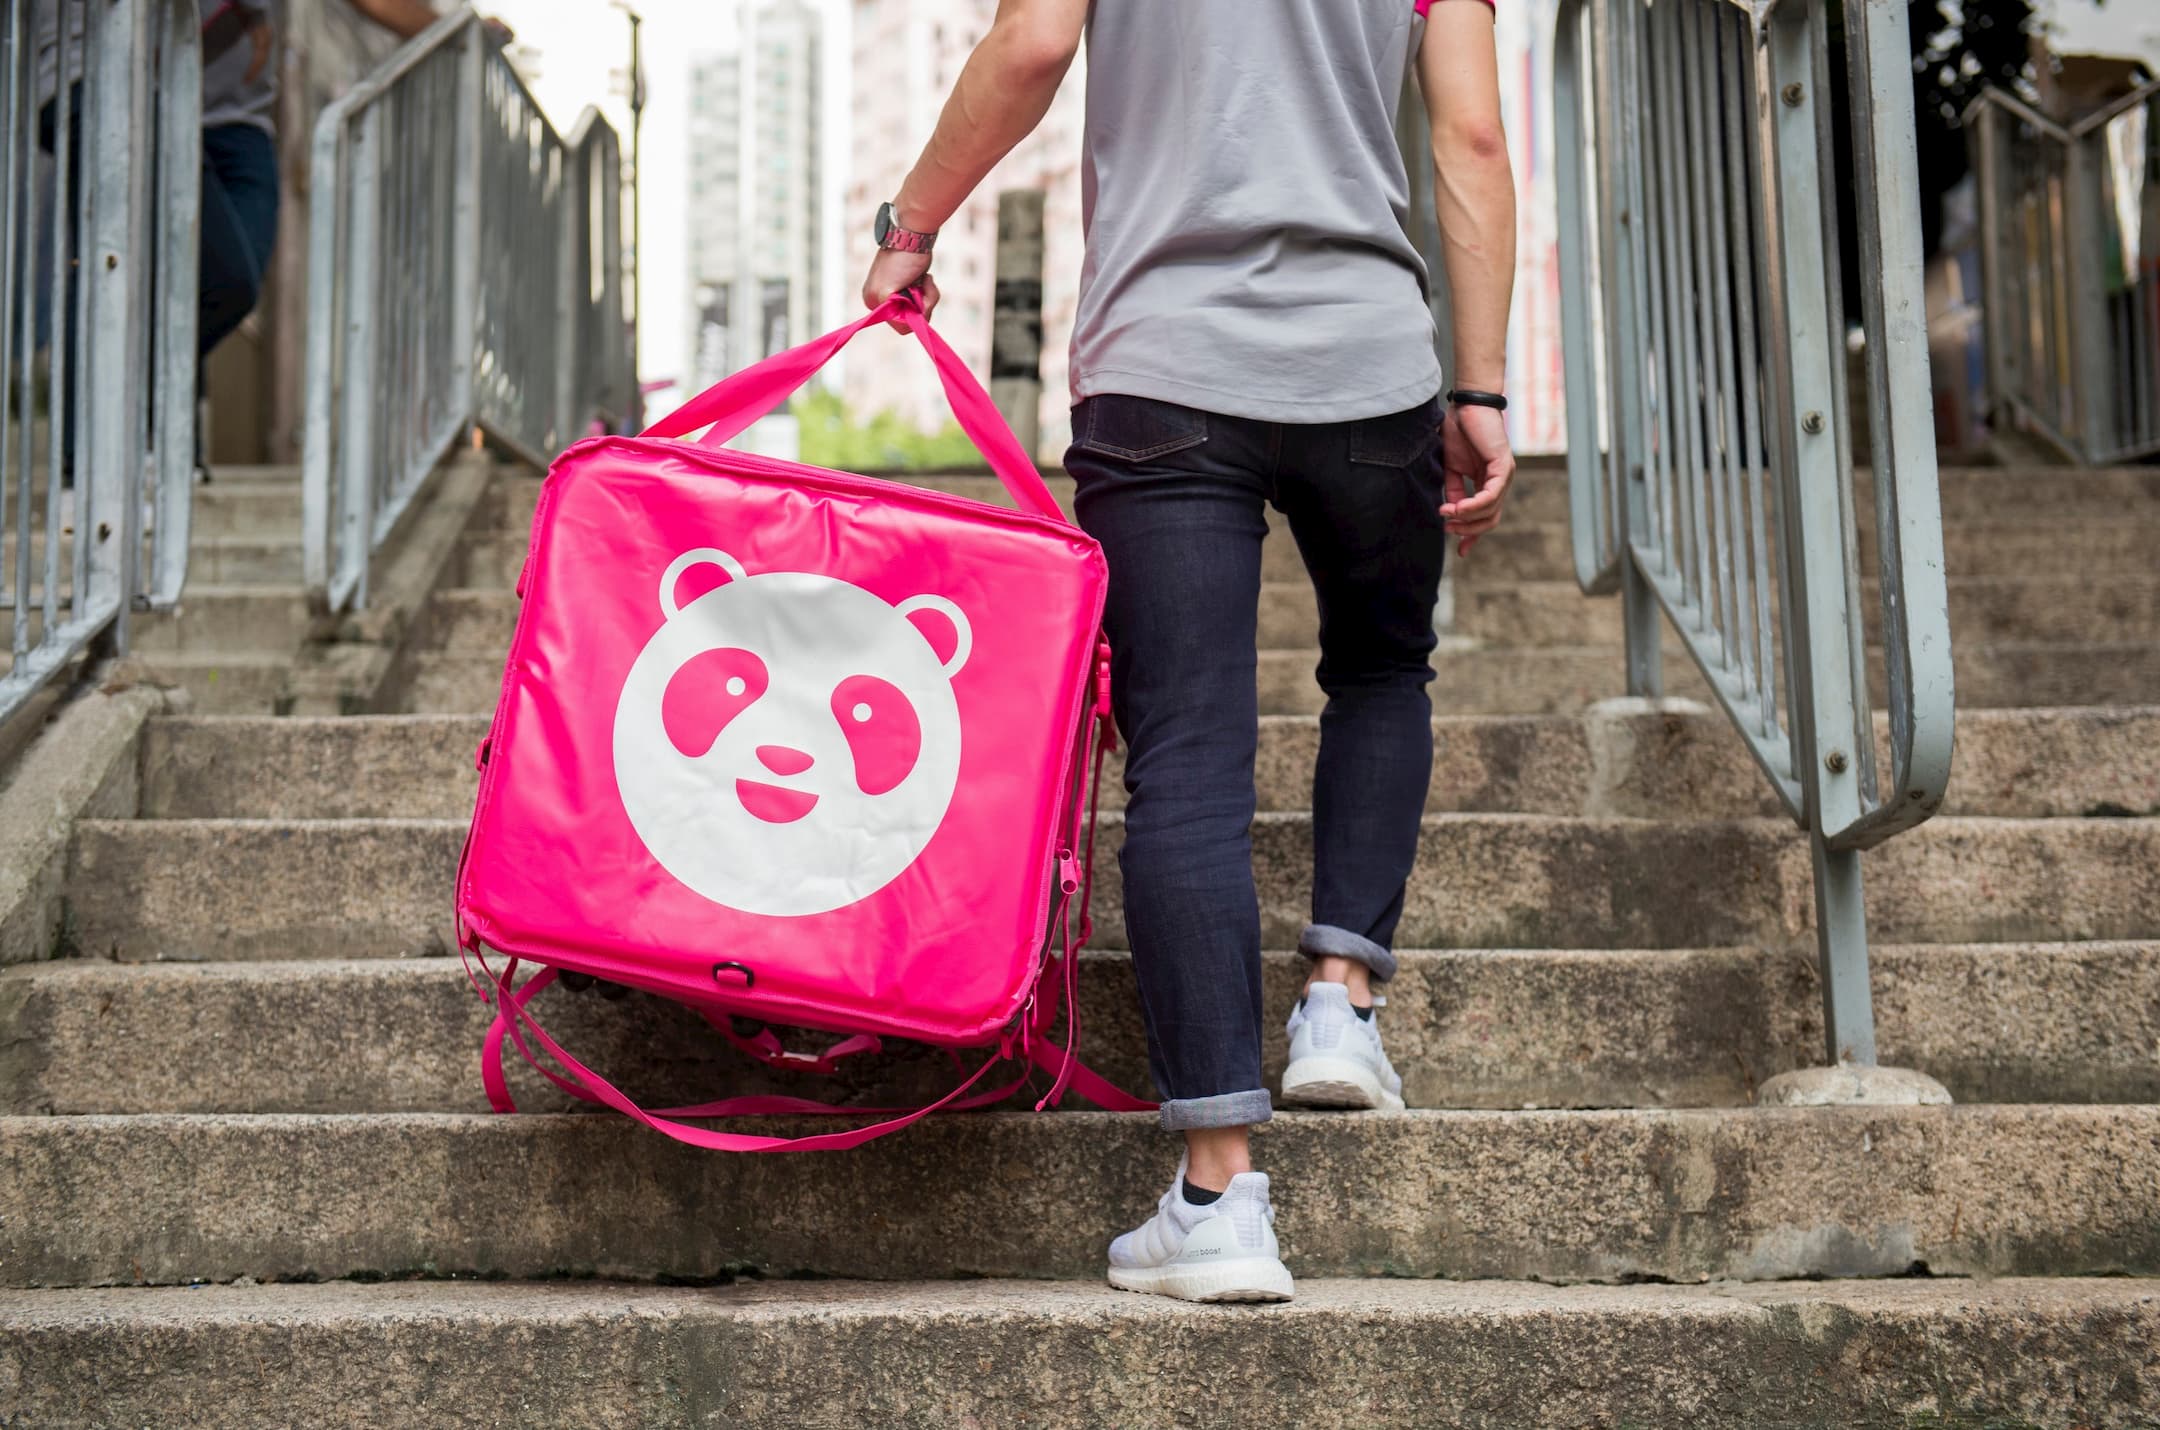 Tesco and foodpanda partners for customers’ greater convenience